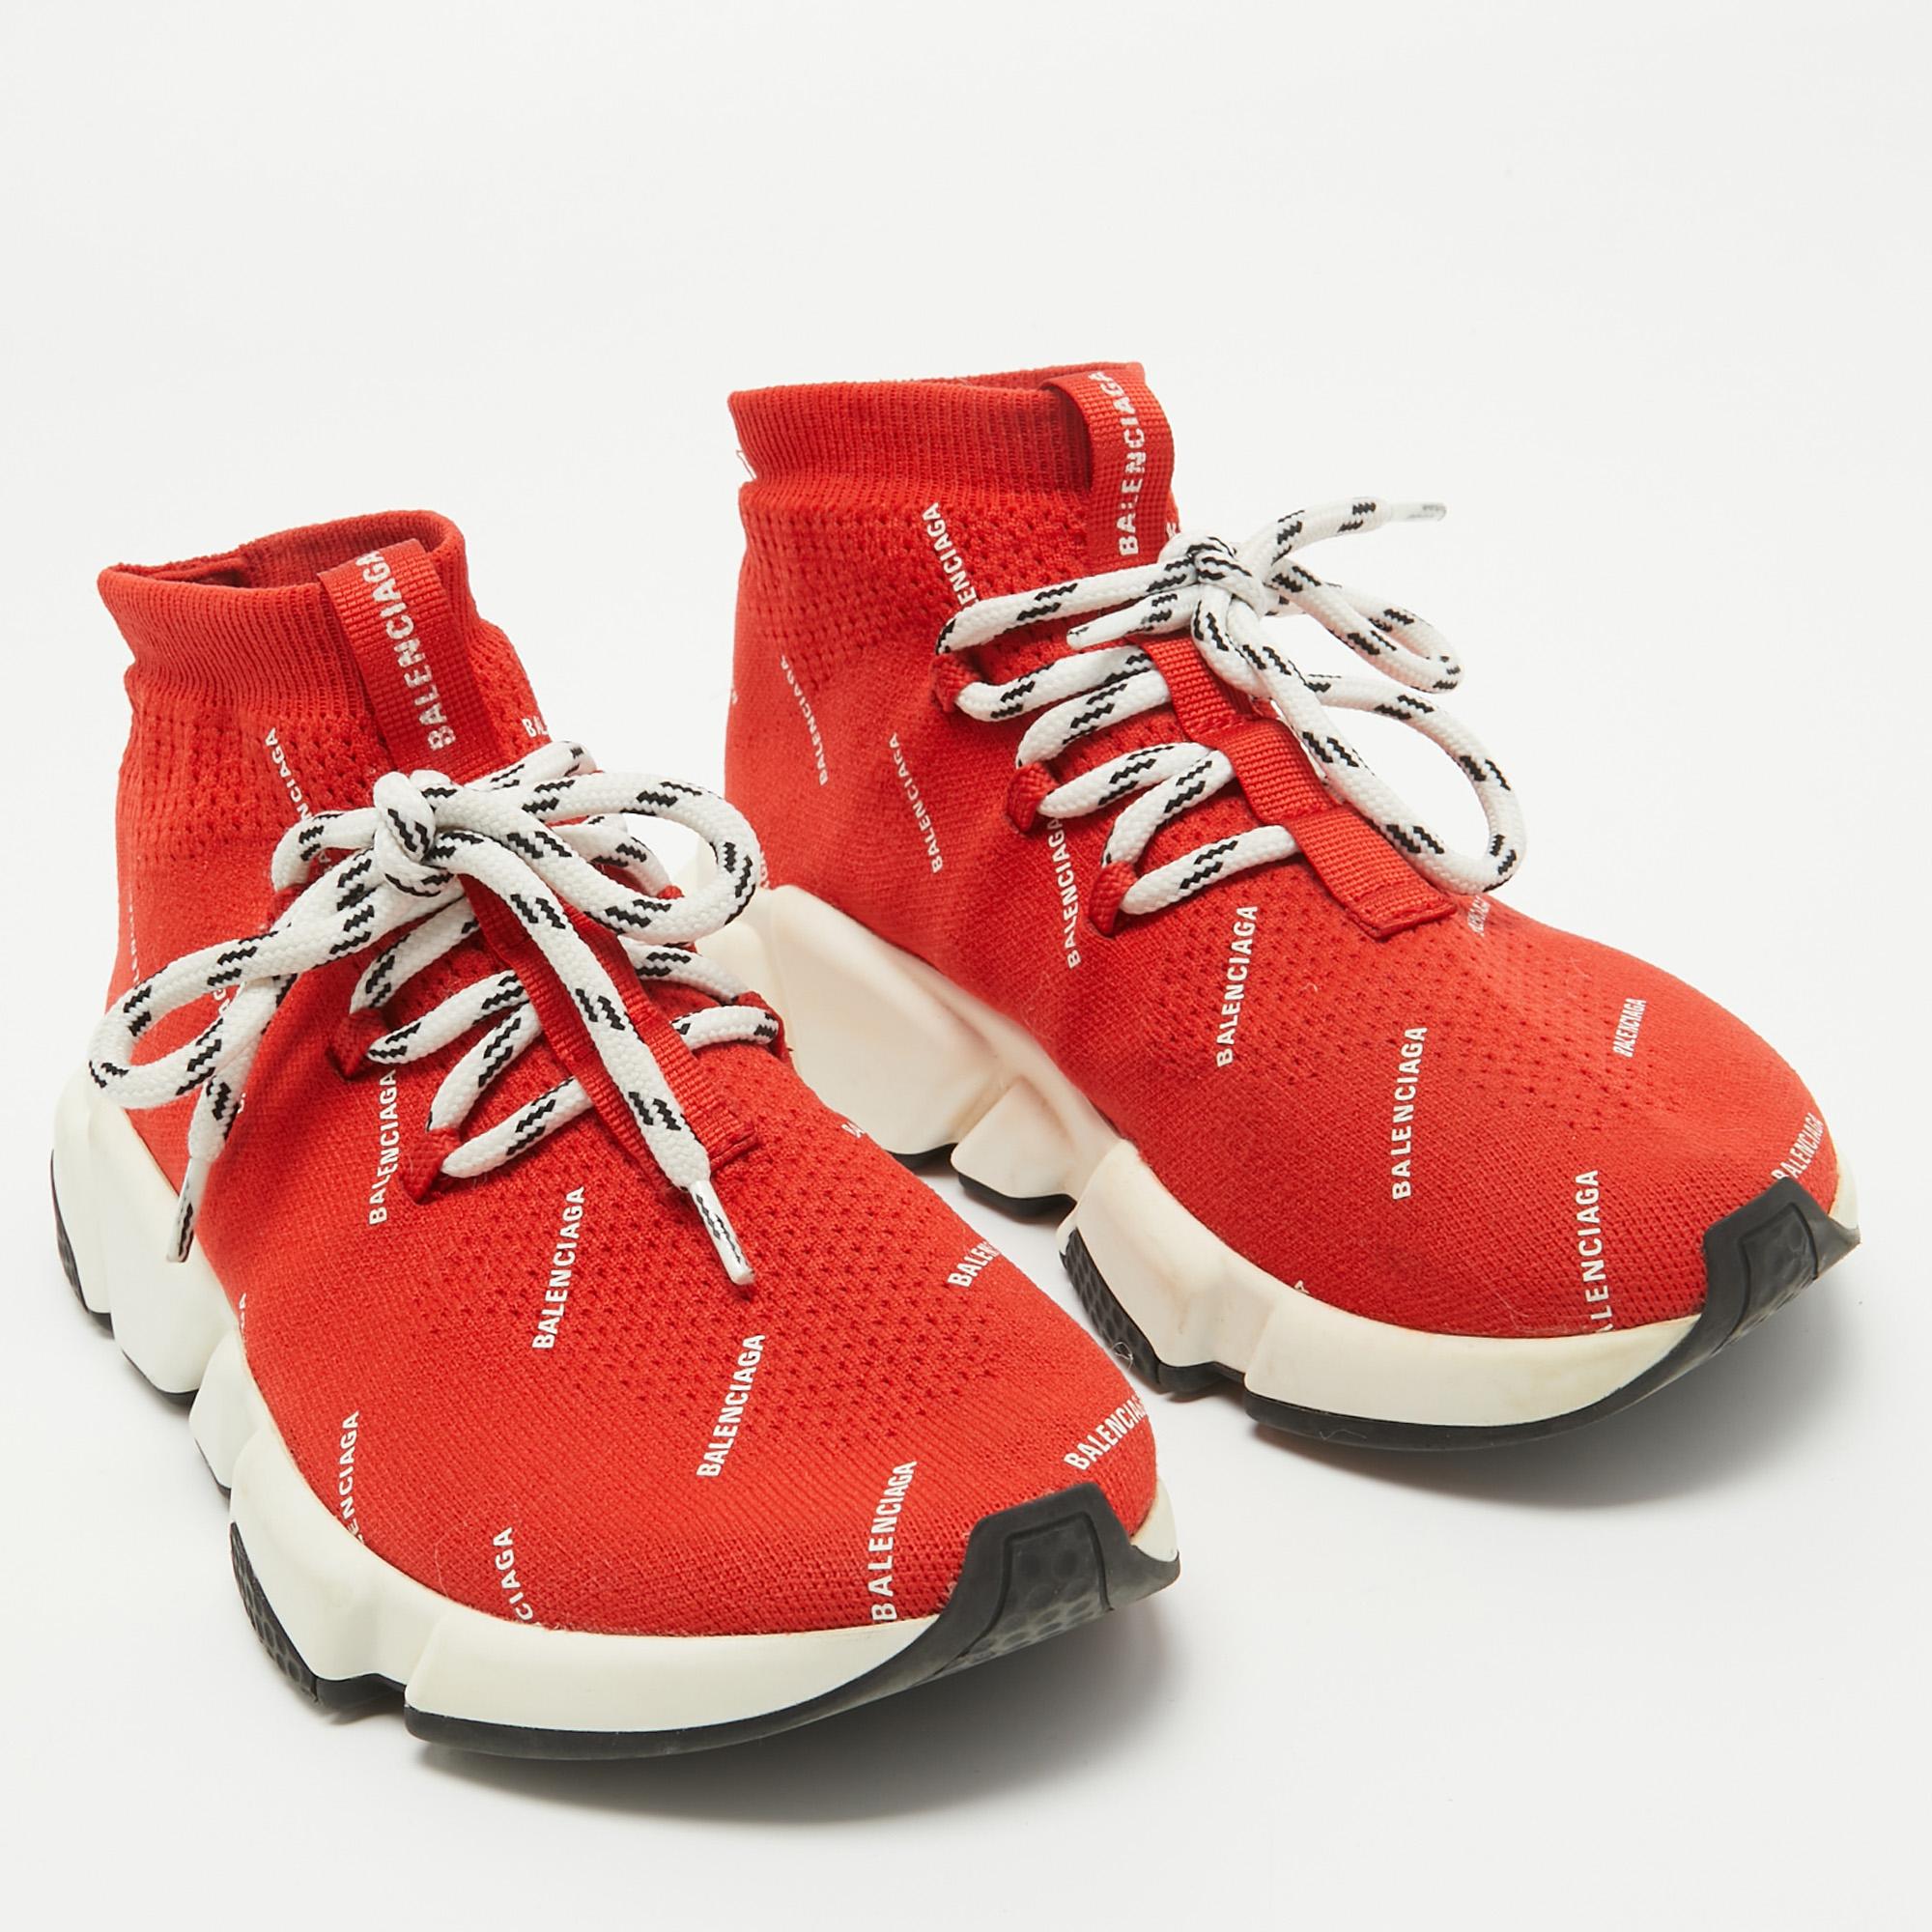 Balenciaga Red Knit Fabric Speed High Top Sneakers Size 36 In Good Condition For Sale In Dubai, Al Qouz 2